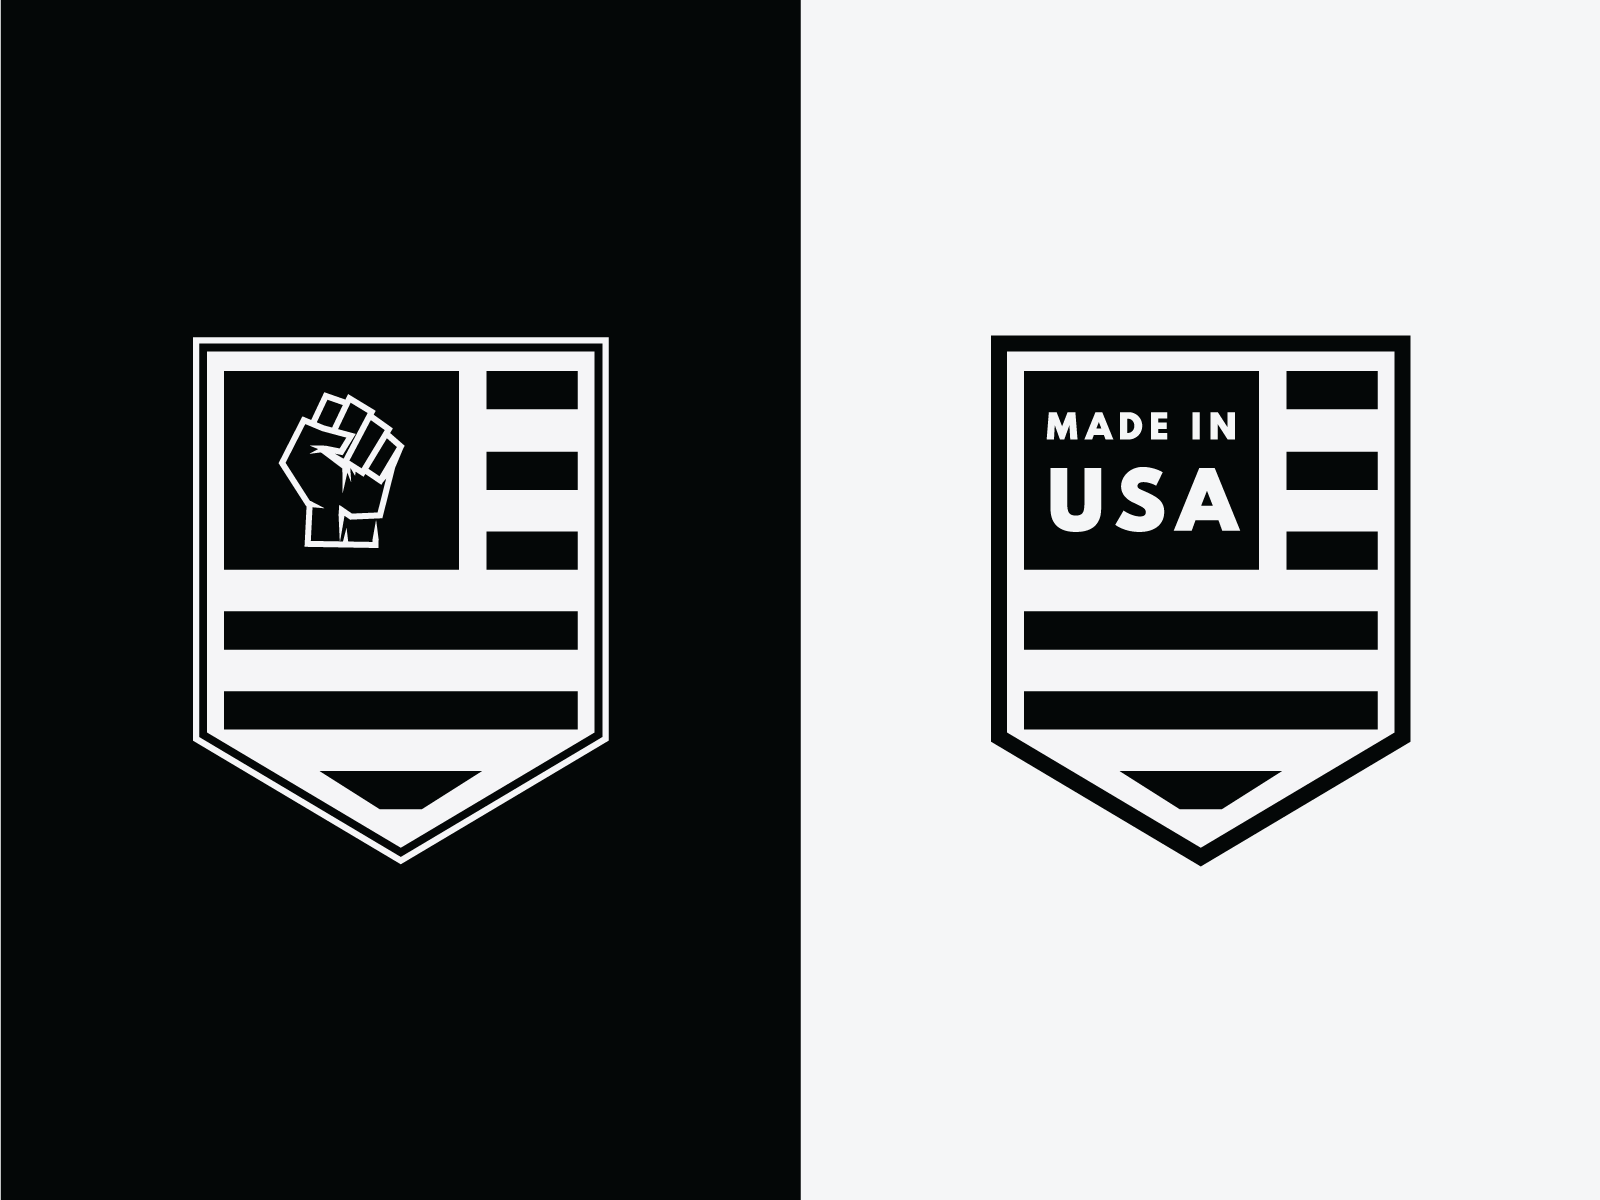 Independence Day 4th of july black lives matter grand rapids graphic design illustration independence day justice peace police brutality protest racism united states